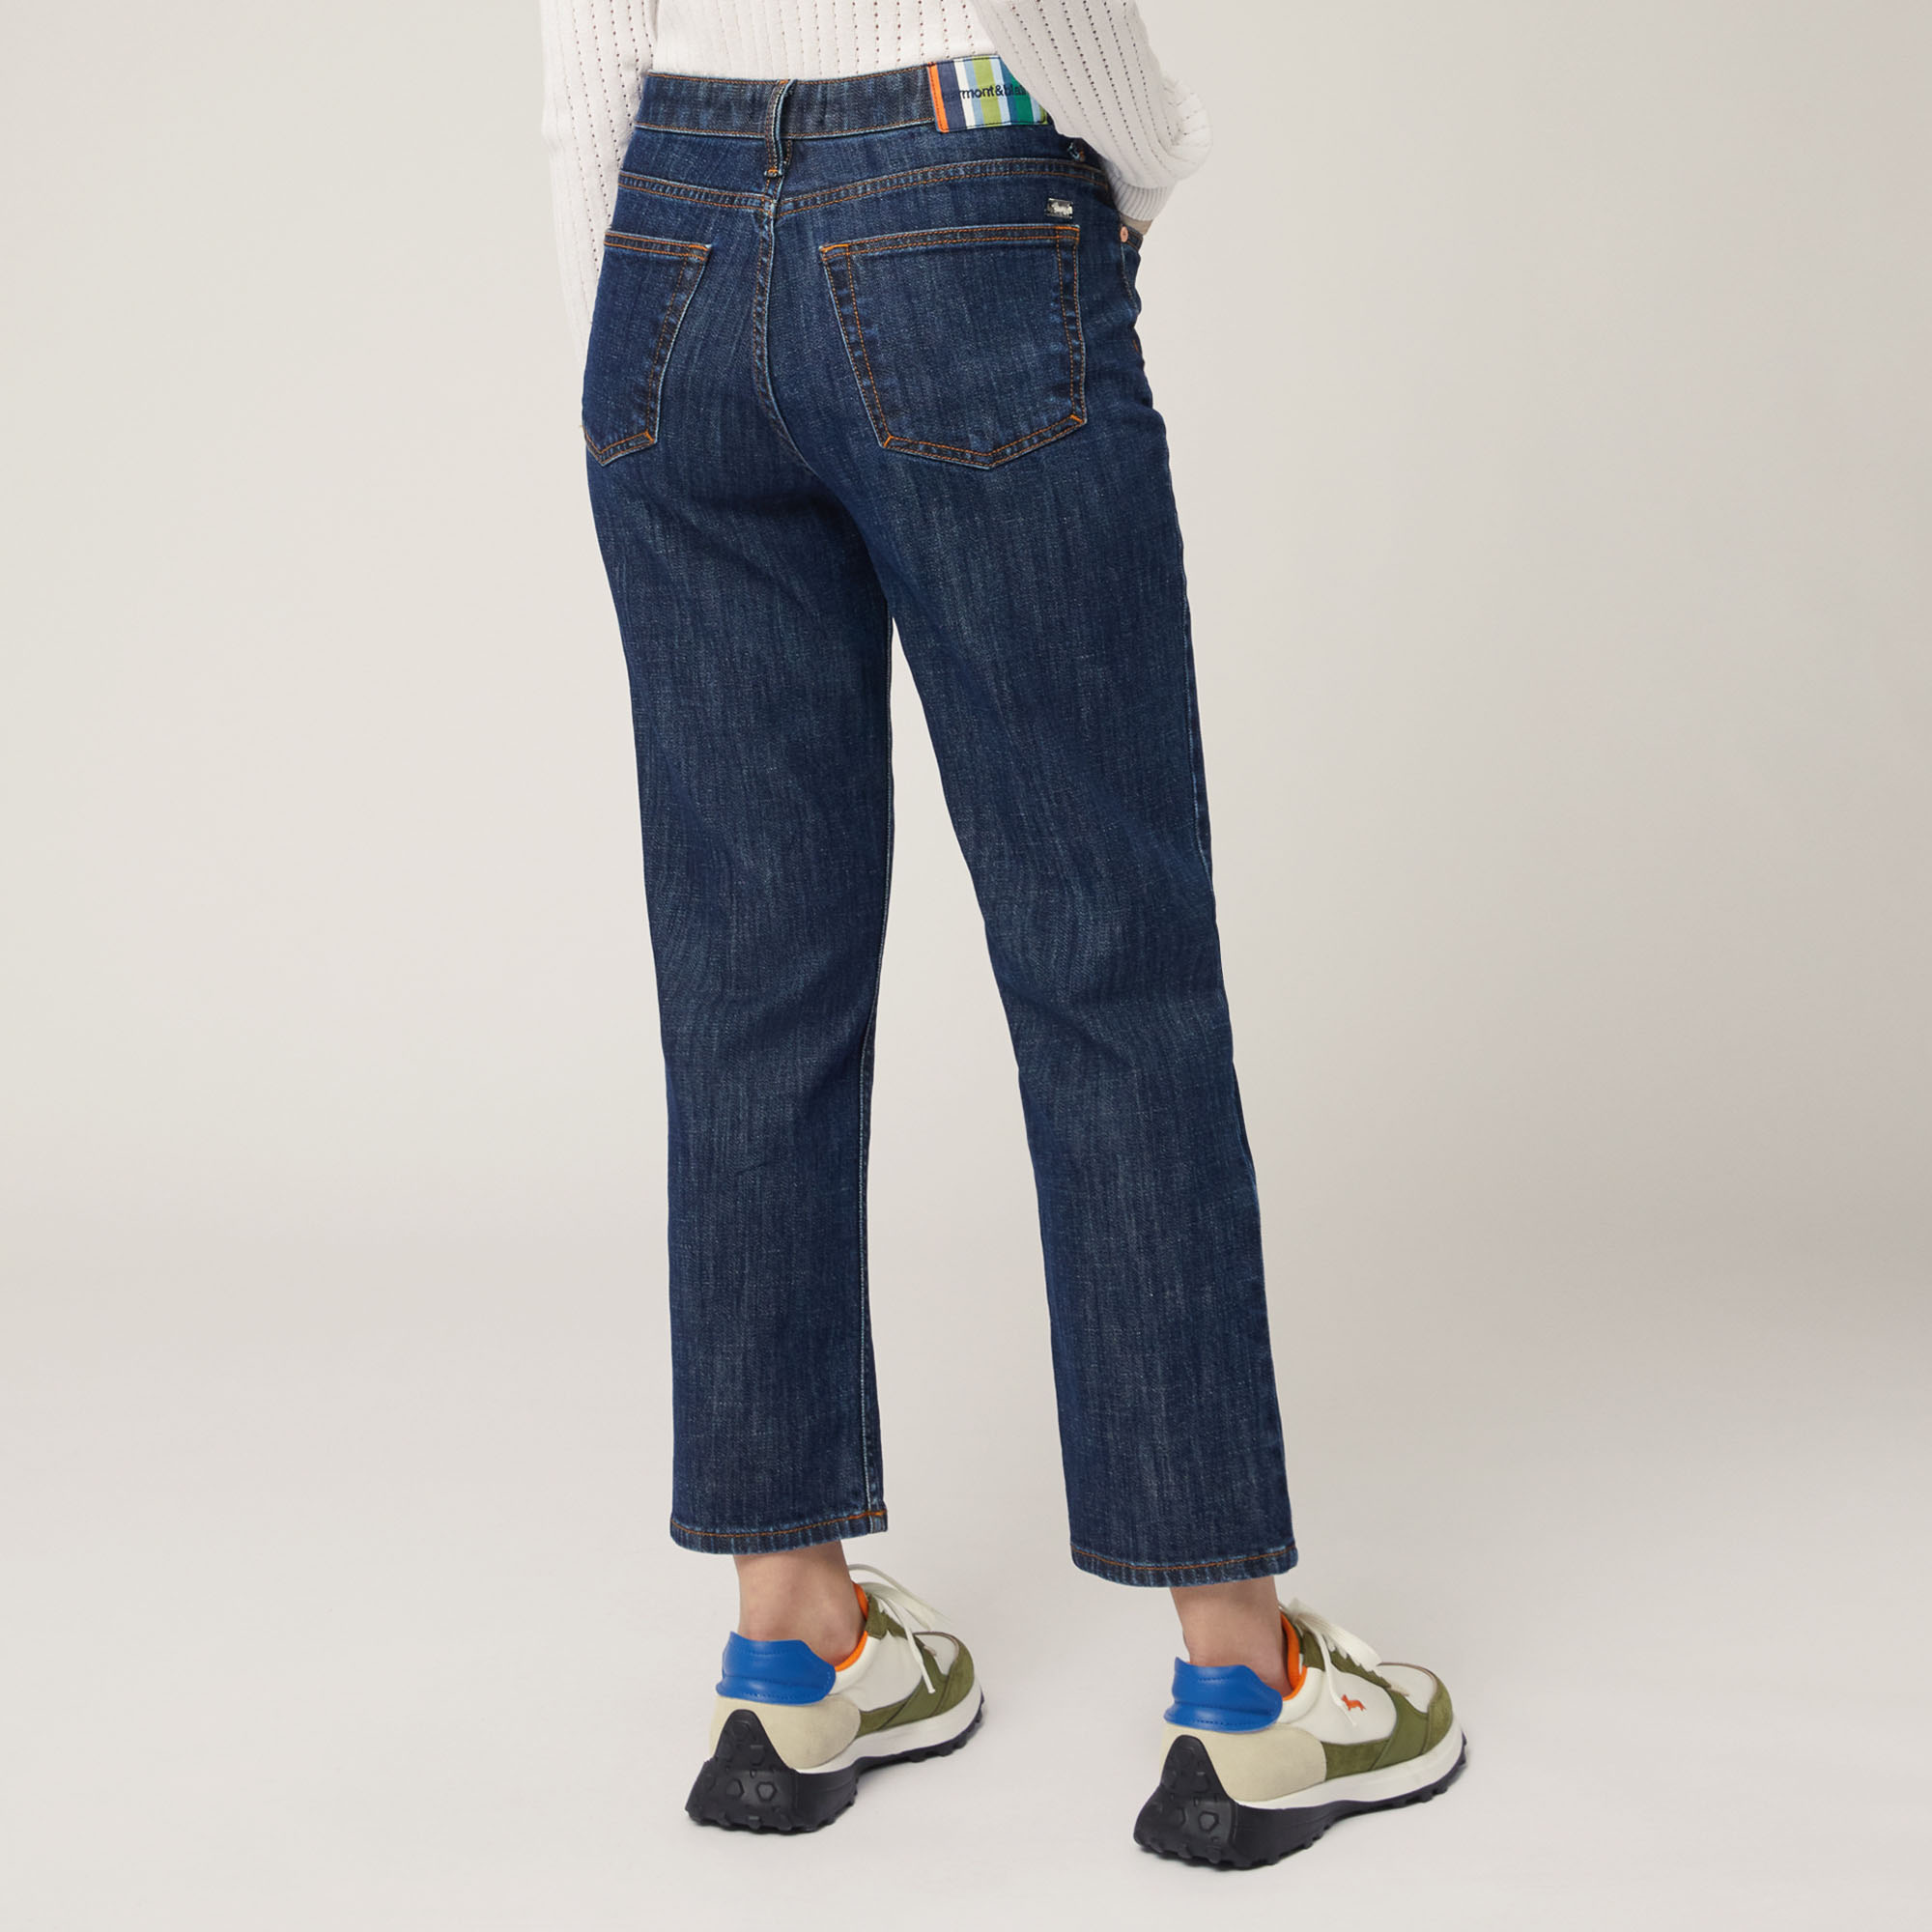 Denim Trousers with Striped Label